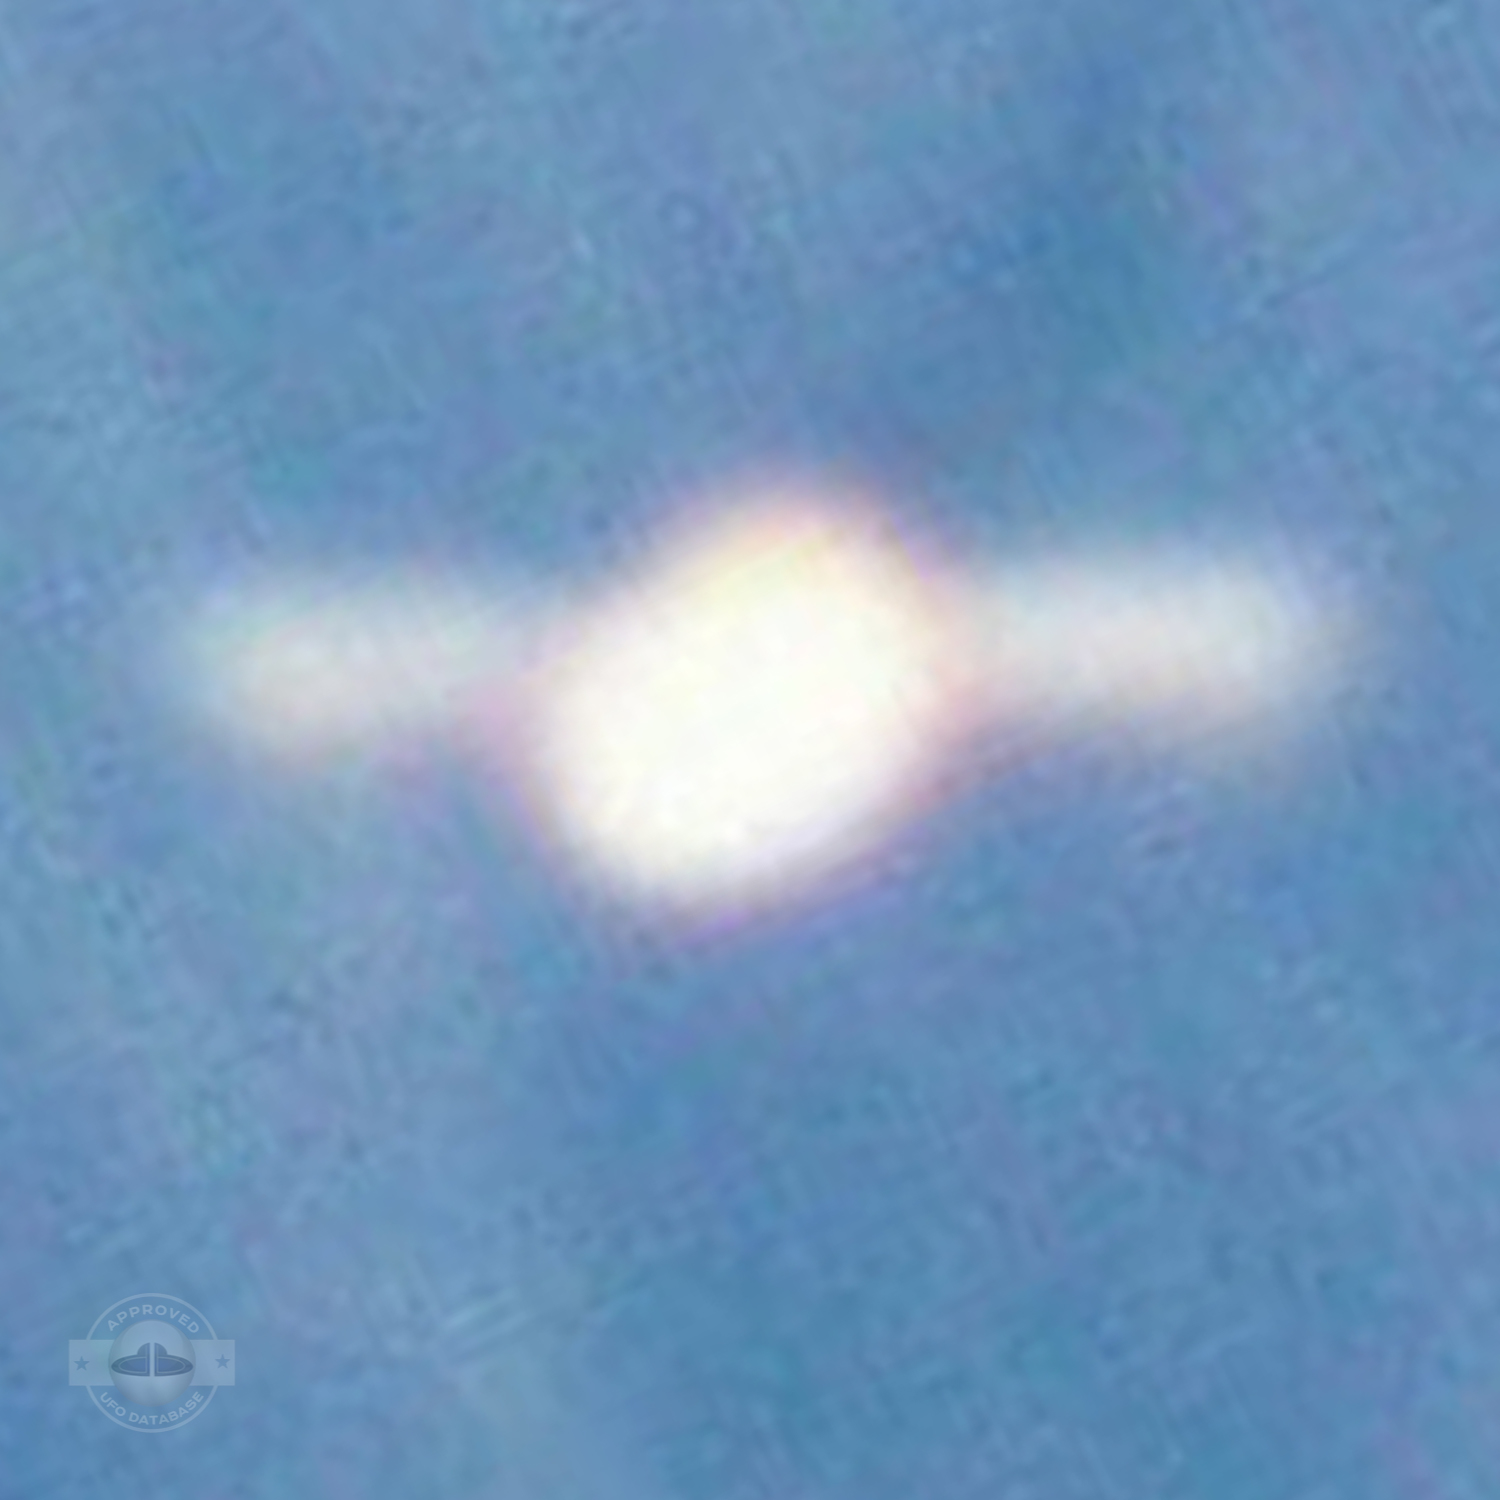 Bright Winged UFO seen passing by extremely fast in Yongzhou | China UFO Picture #208-6